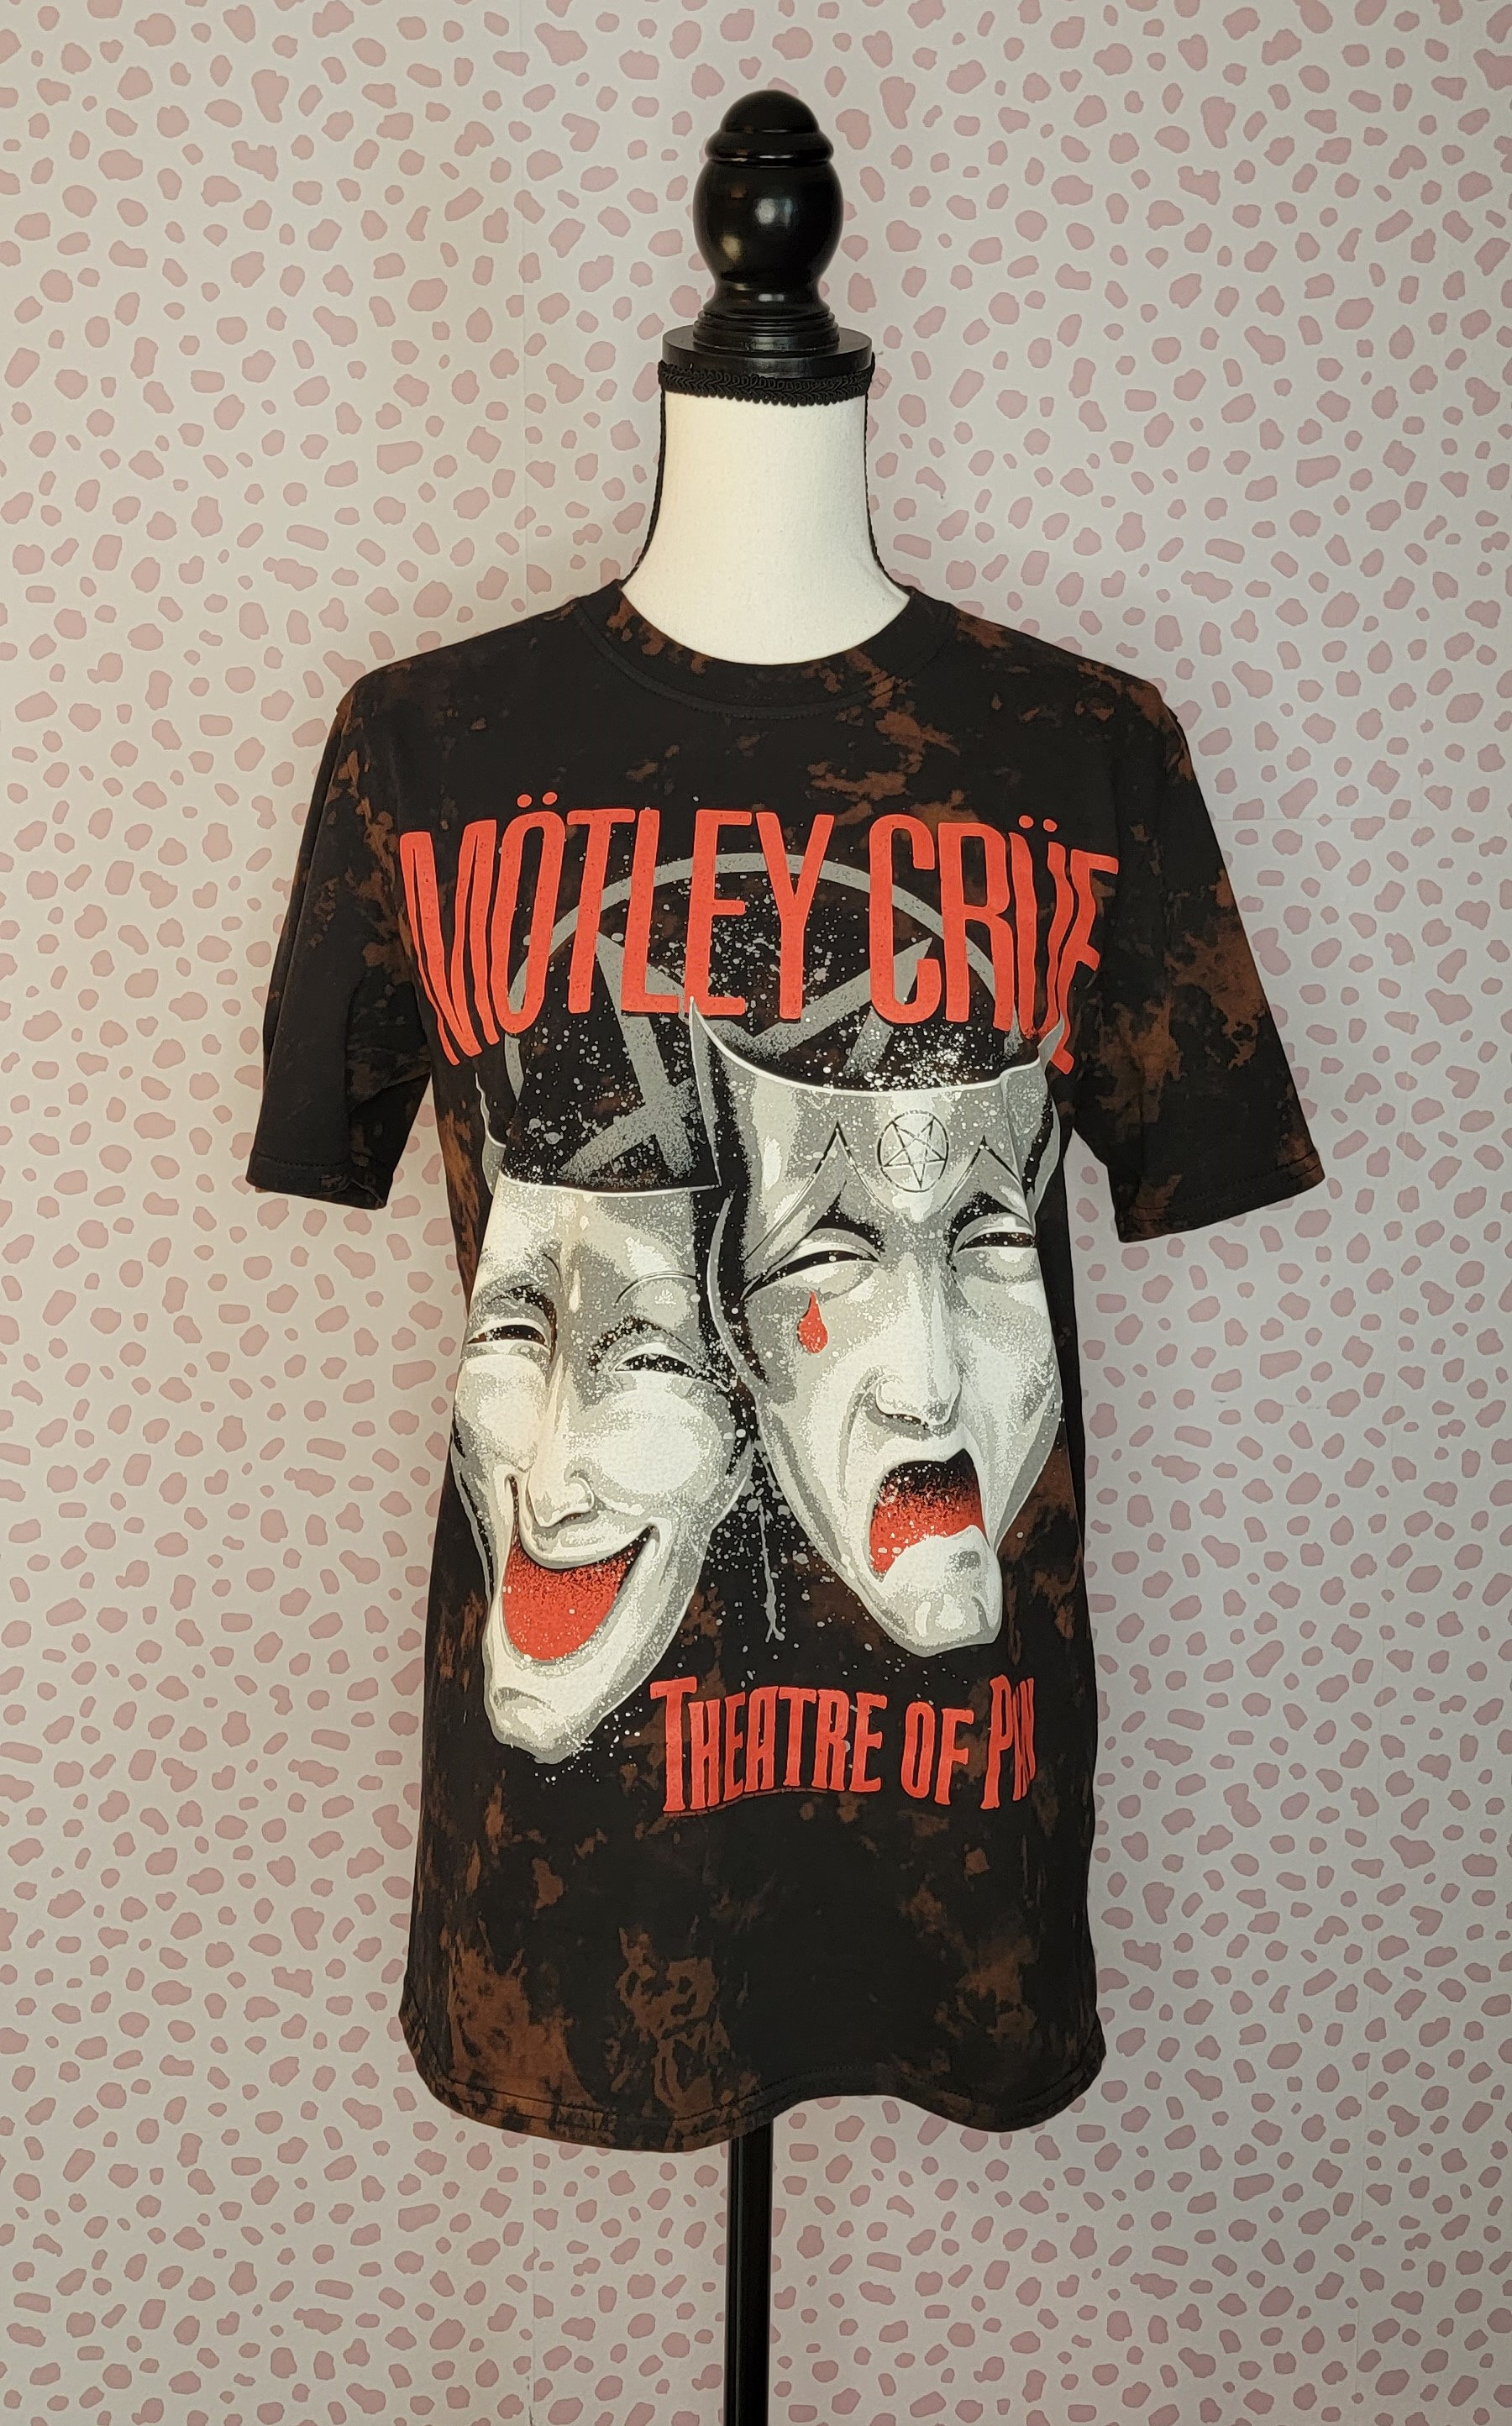 Motley Crue Theatre of Pain Distressed Vintage Style Band Tee